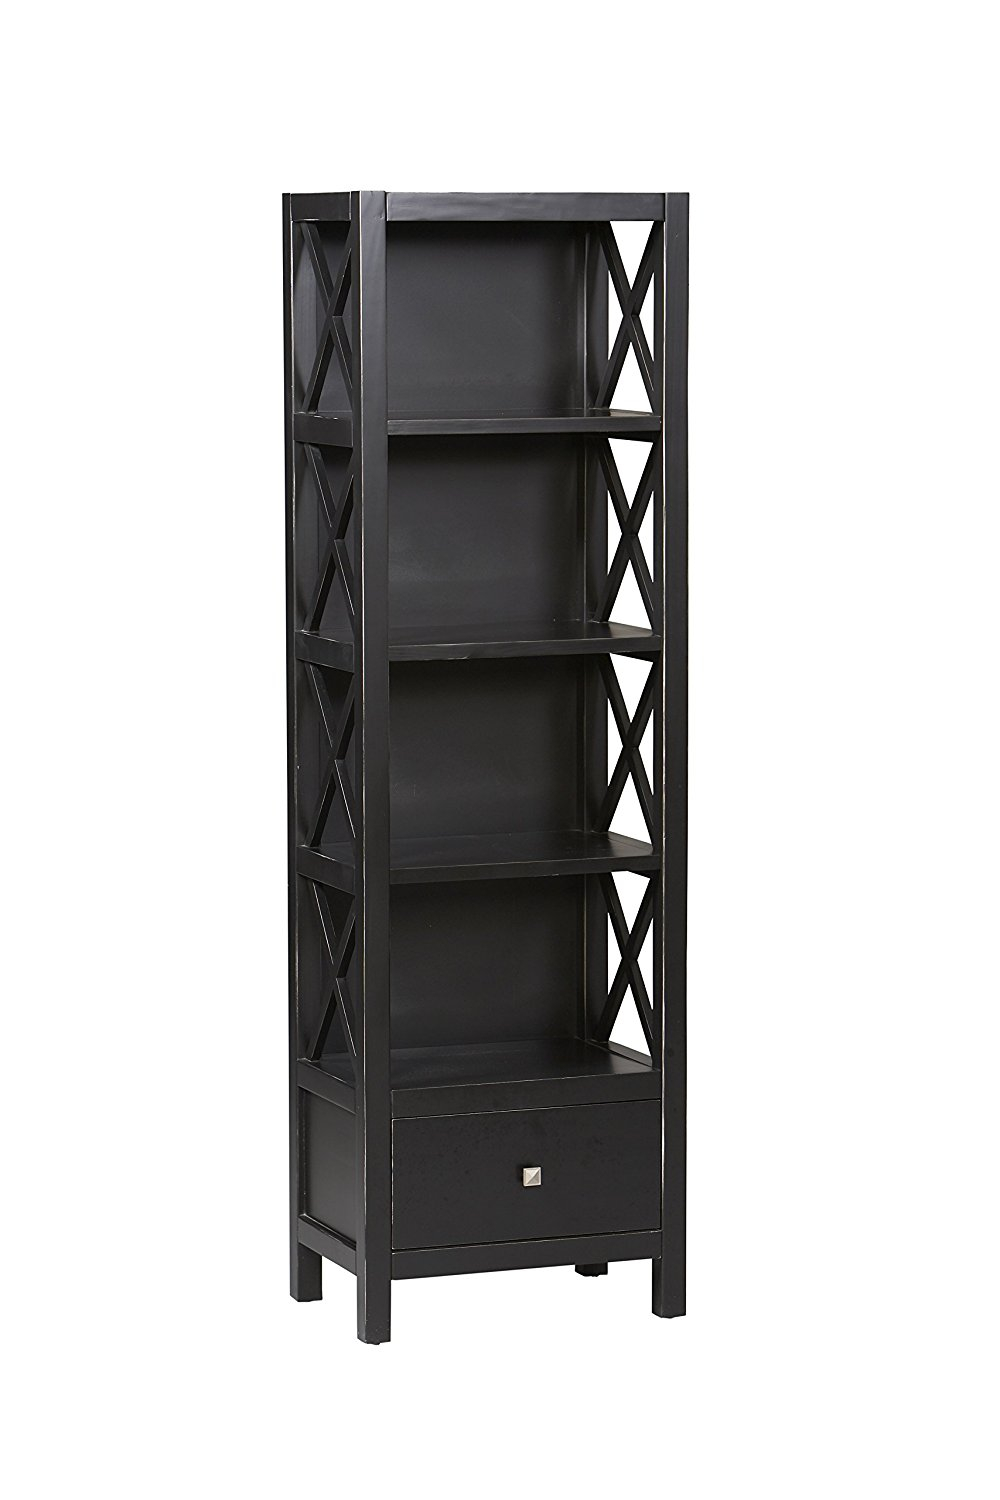 Top 15 Narrow Bookshelf And Bookcase Collection intended for sizing 1000 X 1500